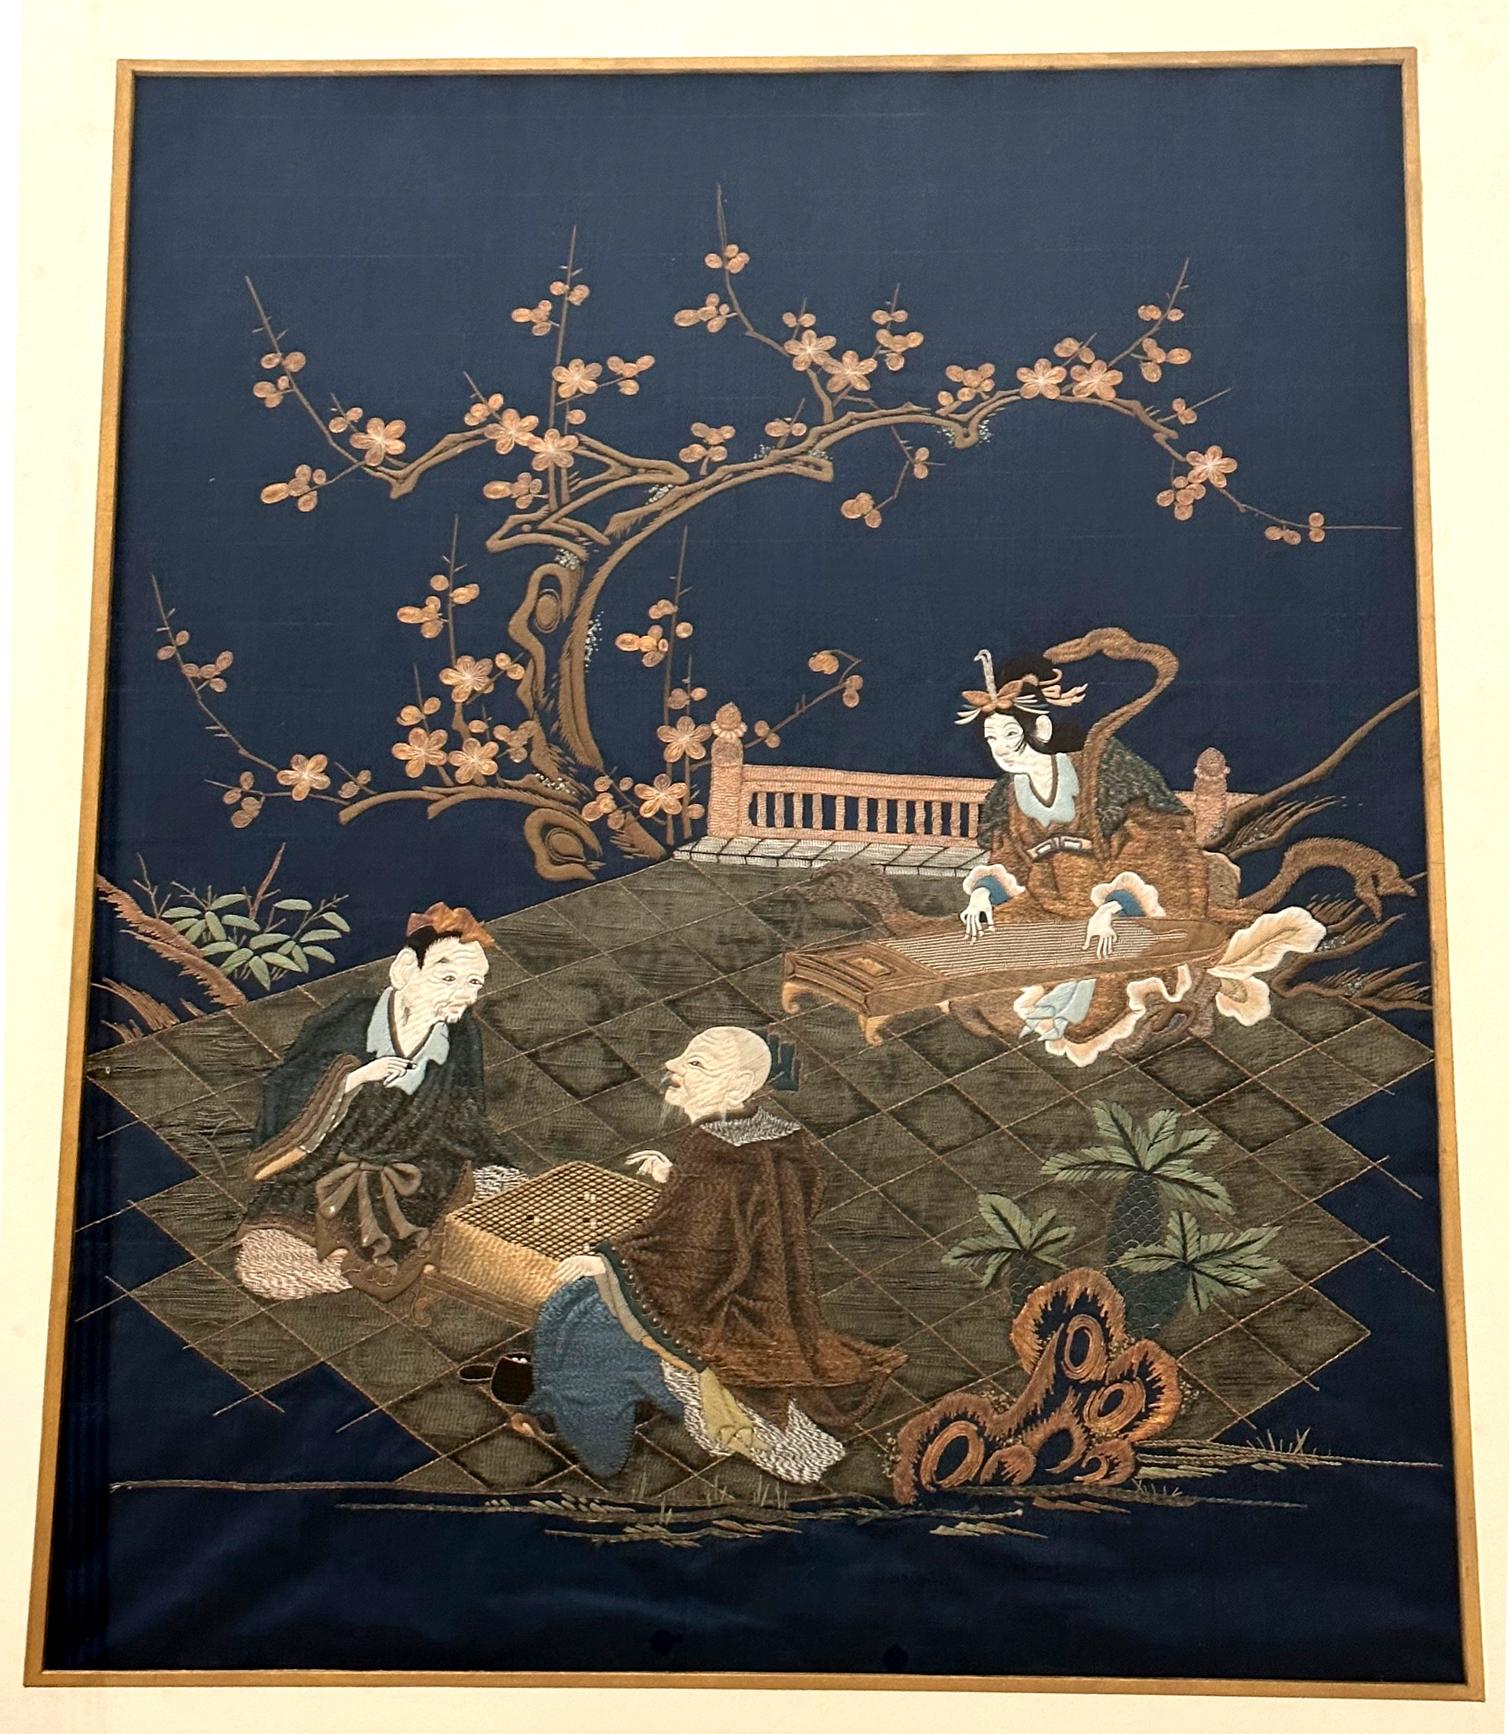 Framed Antique Japanese Embroidery Fukusa Textile Panel In Good Condition For Sale In Atlanta, GA